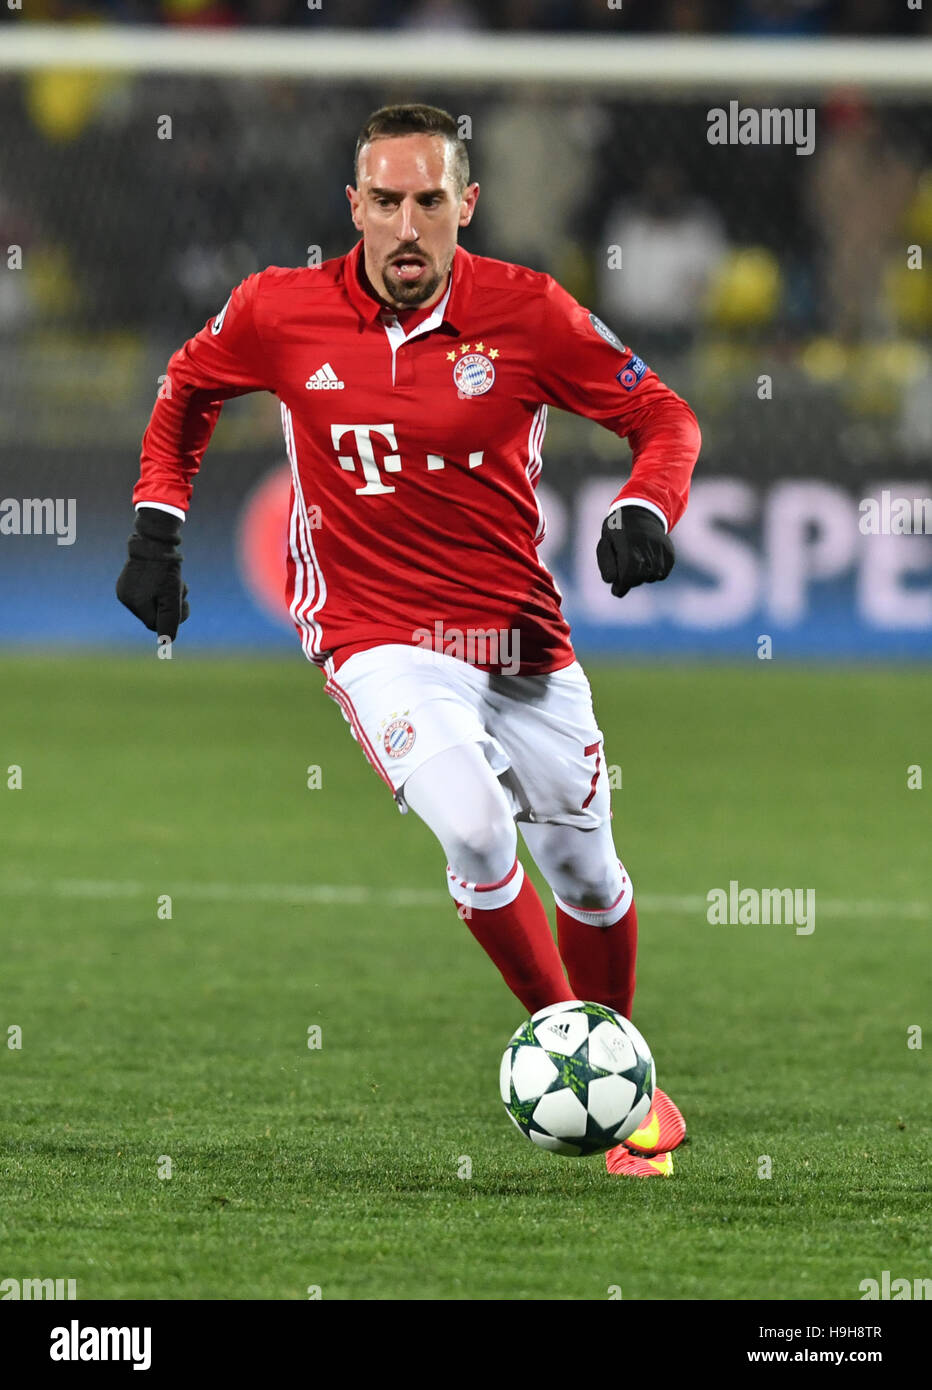 Rostov-on-Don, Russia. 23rd Nov, 2016. Franck Ribery from FC Bayern Munich at the Champions League soccer match between FC Rostov and FC Bayern Munich in the Olimp-2 Stadium in Rostov-on-Don, Russia, 23 November 2016. Photo: Peter Kneffel/dpa/Alamy Live News Stock Photo